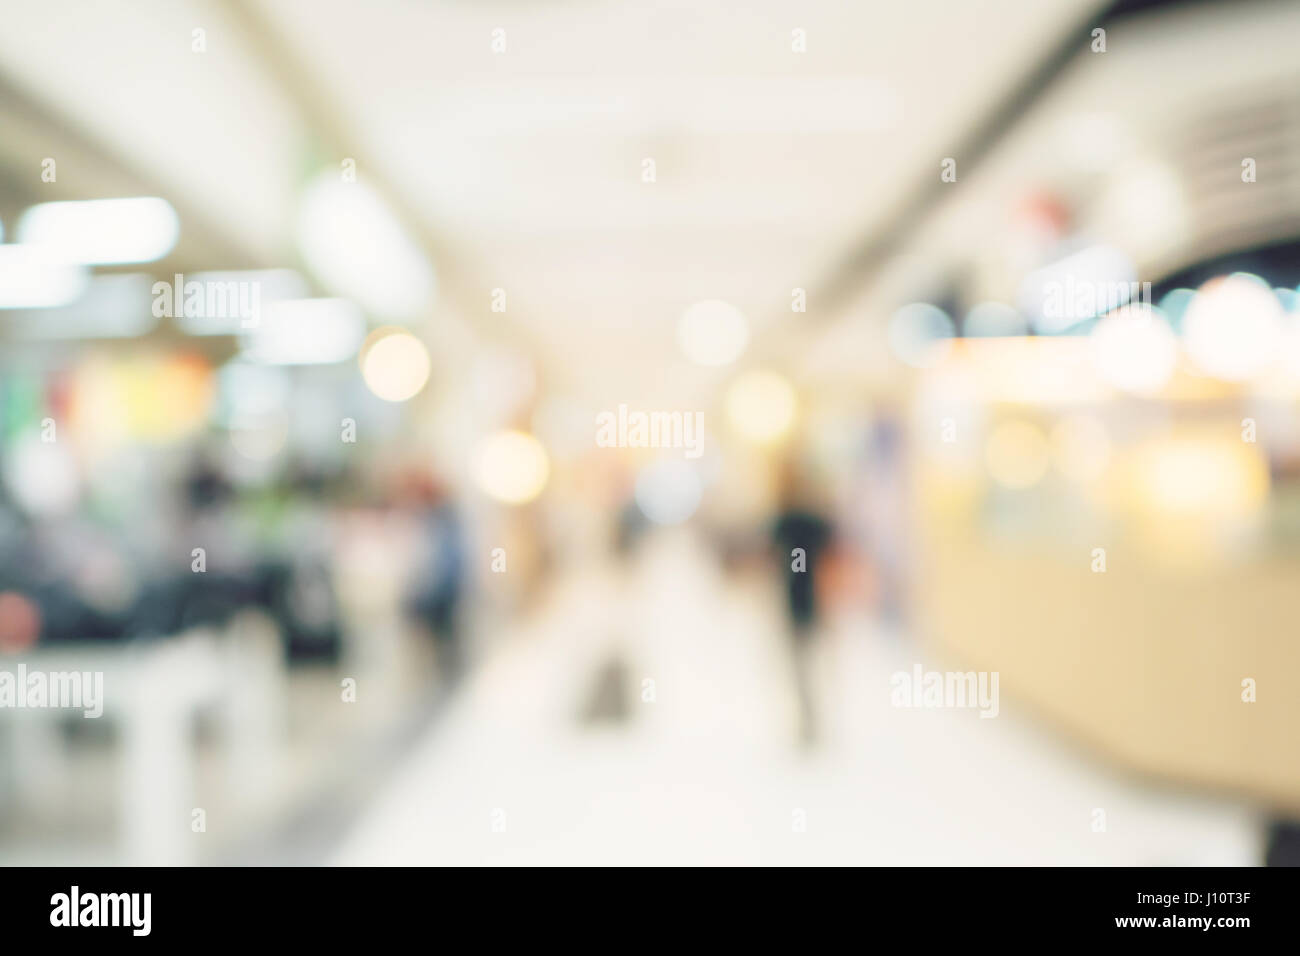 Defocused blur background. People shopping in department store. Stock Photo